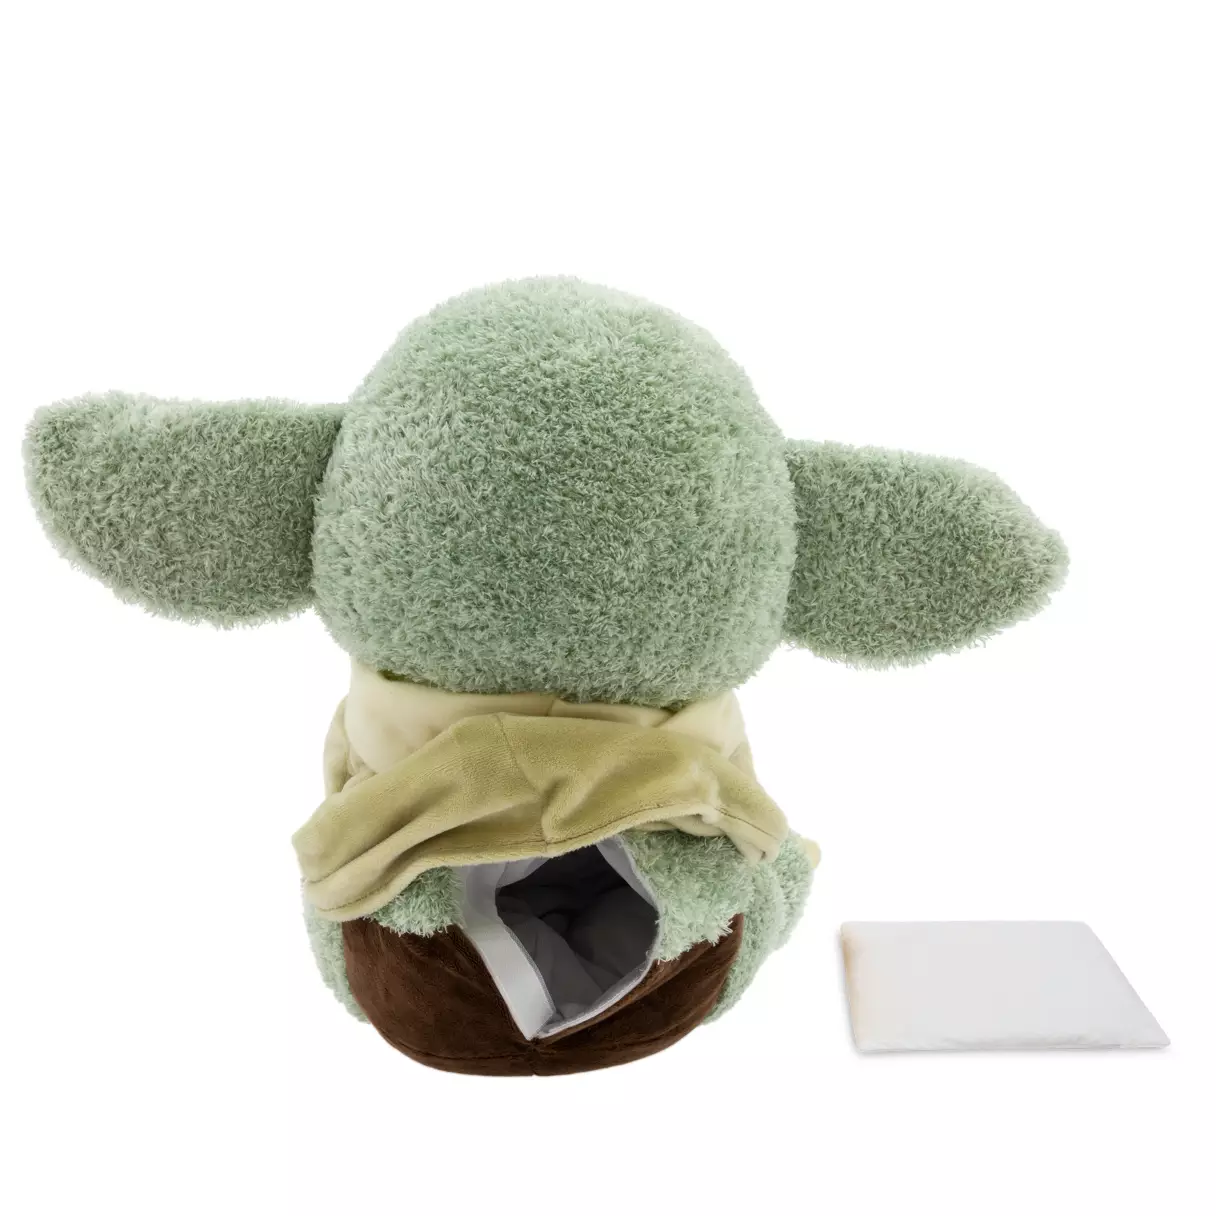 TM The Child (Grogu) Weighted Plush Toy 4